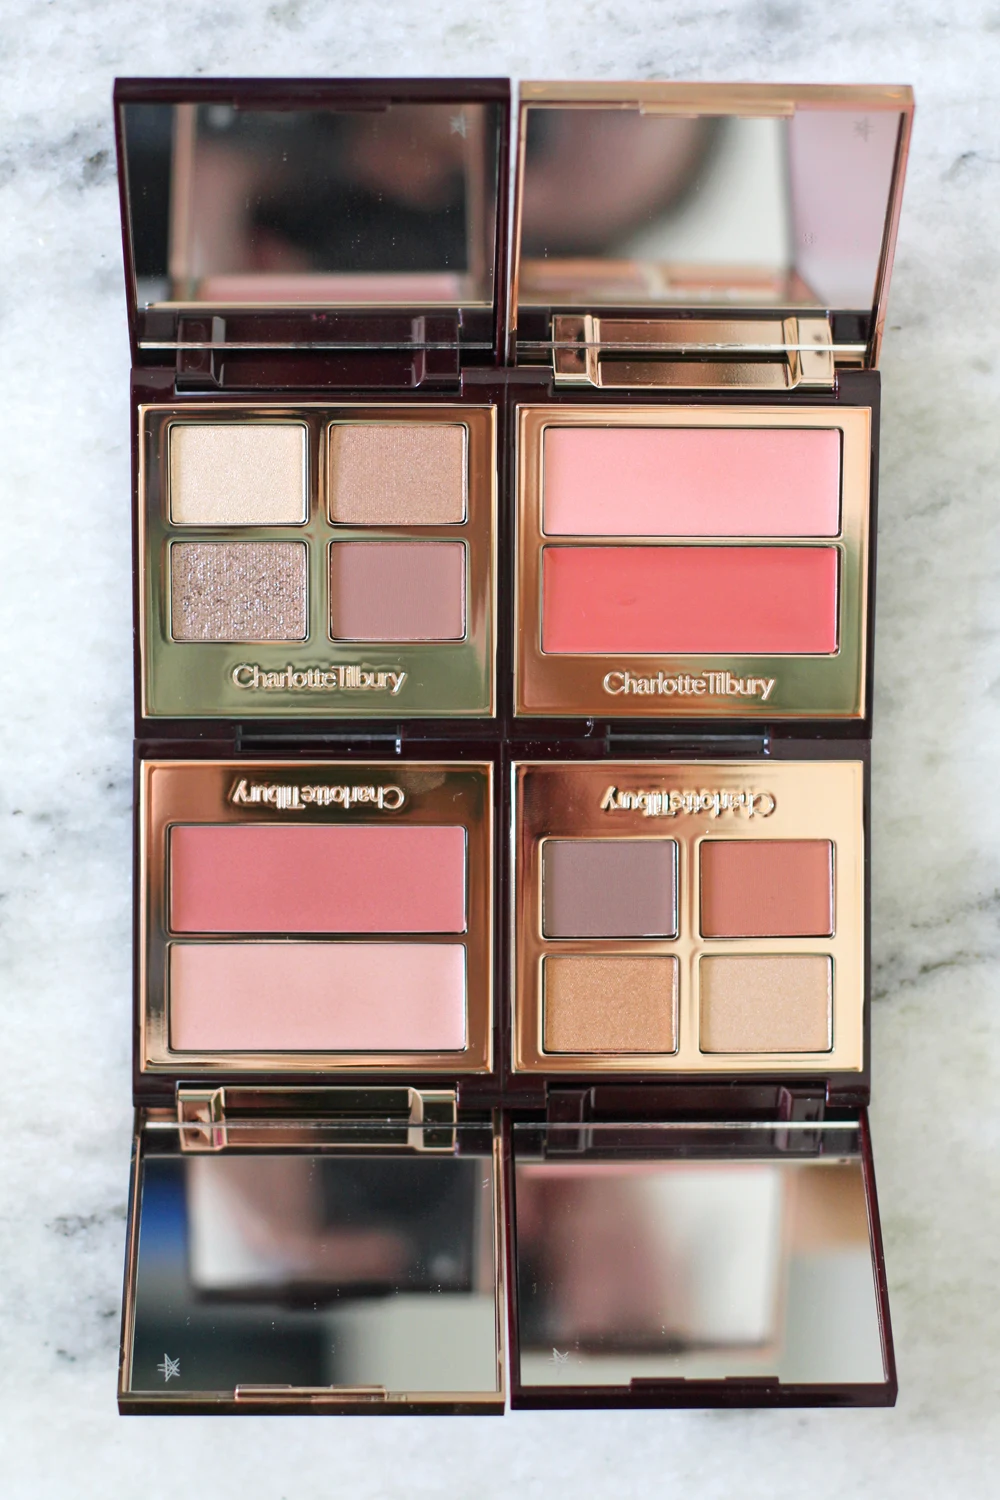 Charlotte Tilbury Beauty Filter eyeshadow palettes and blush & highlighter duos - luxury beauty blog